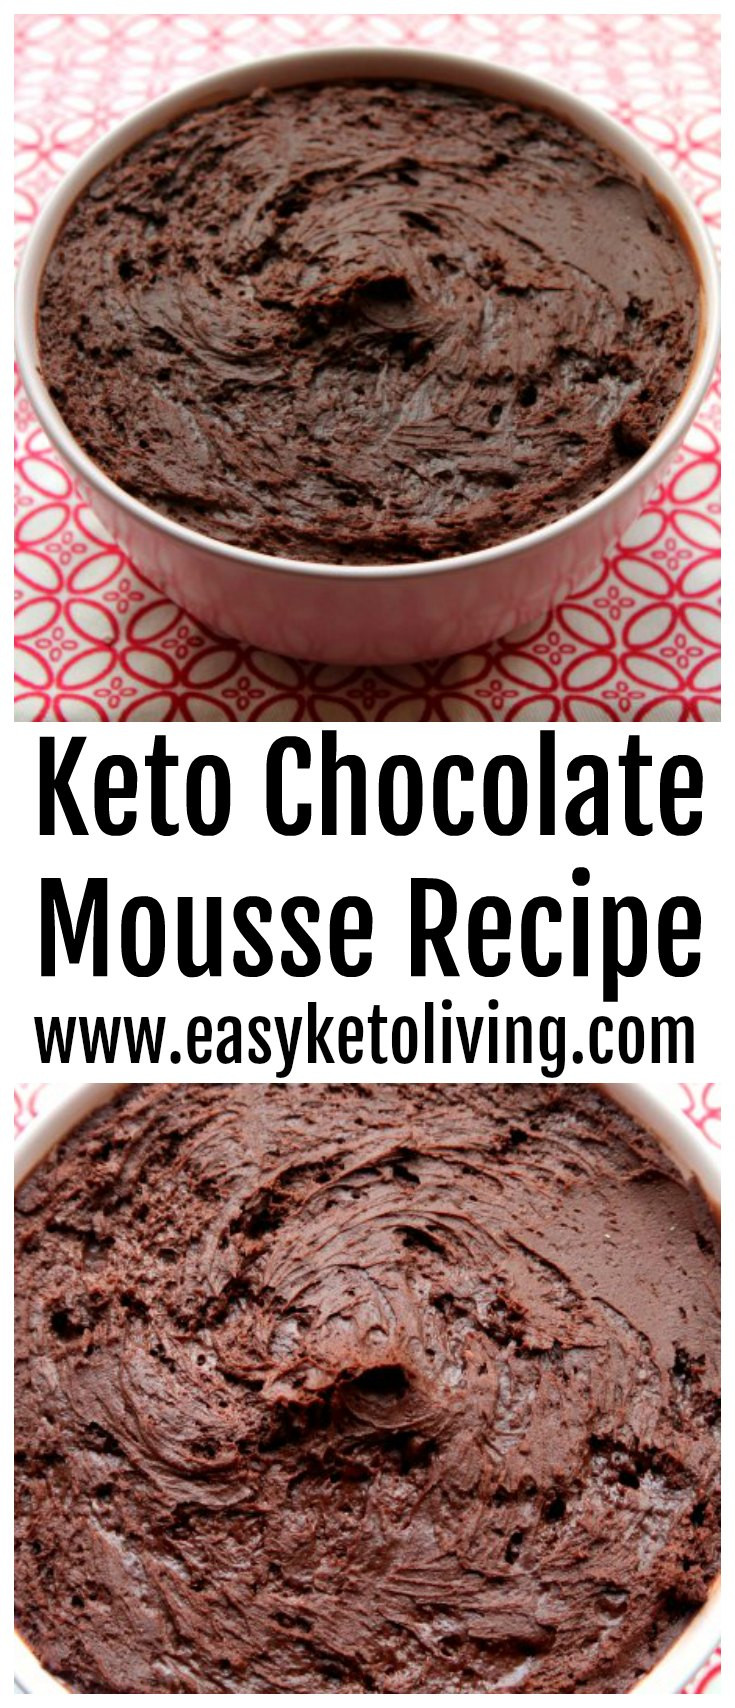 Keto Mousse Pudding
 Keto Chocolate Mousse Recipe Easy Low Carb Chocolate Dessert